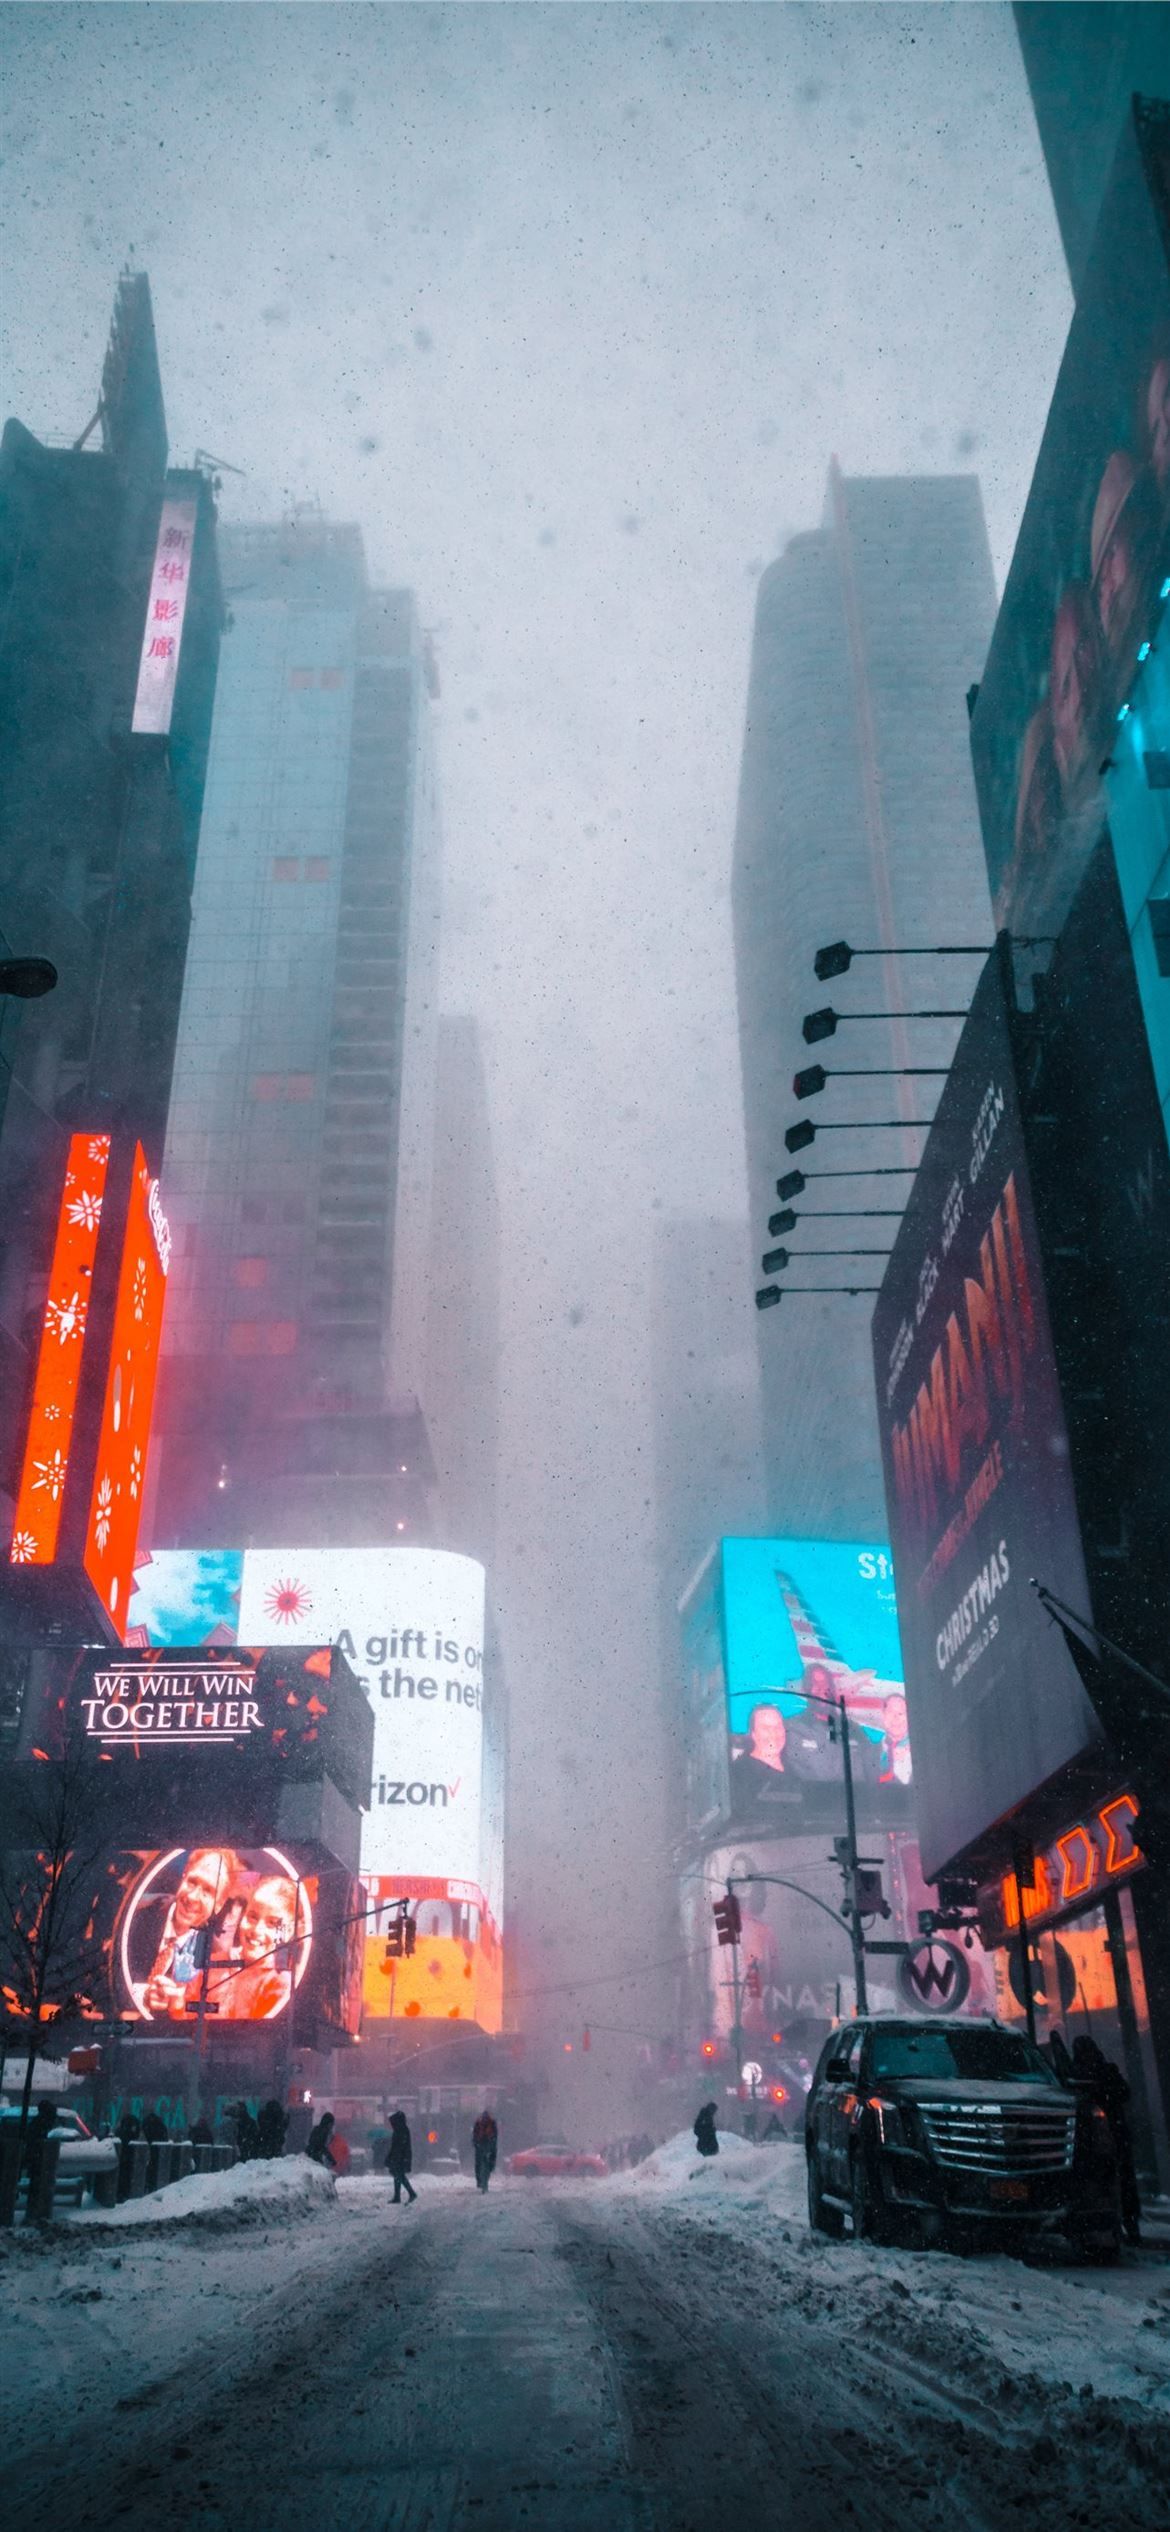 Times Square in the snow - New York